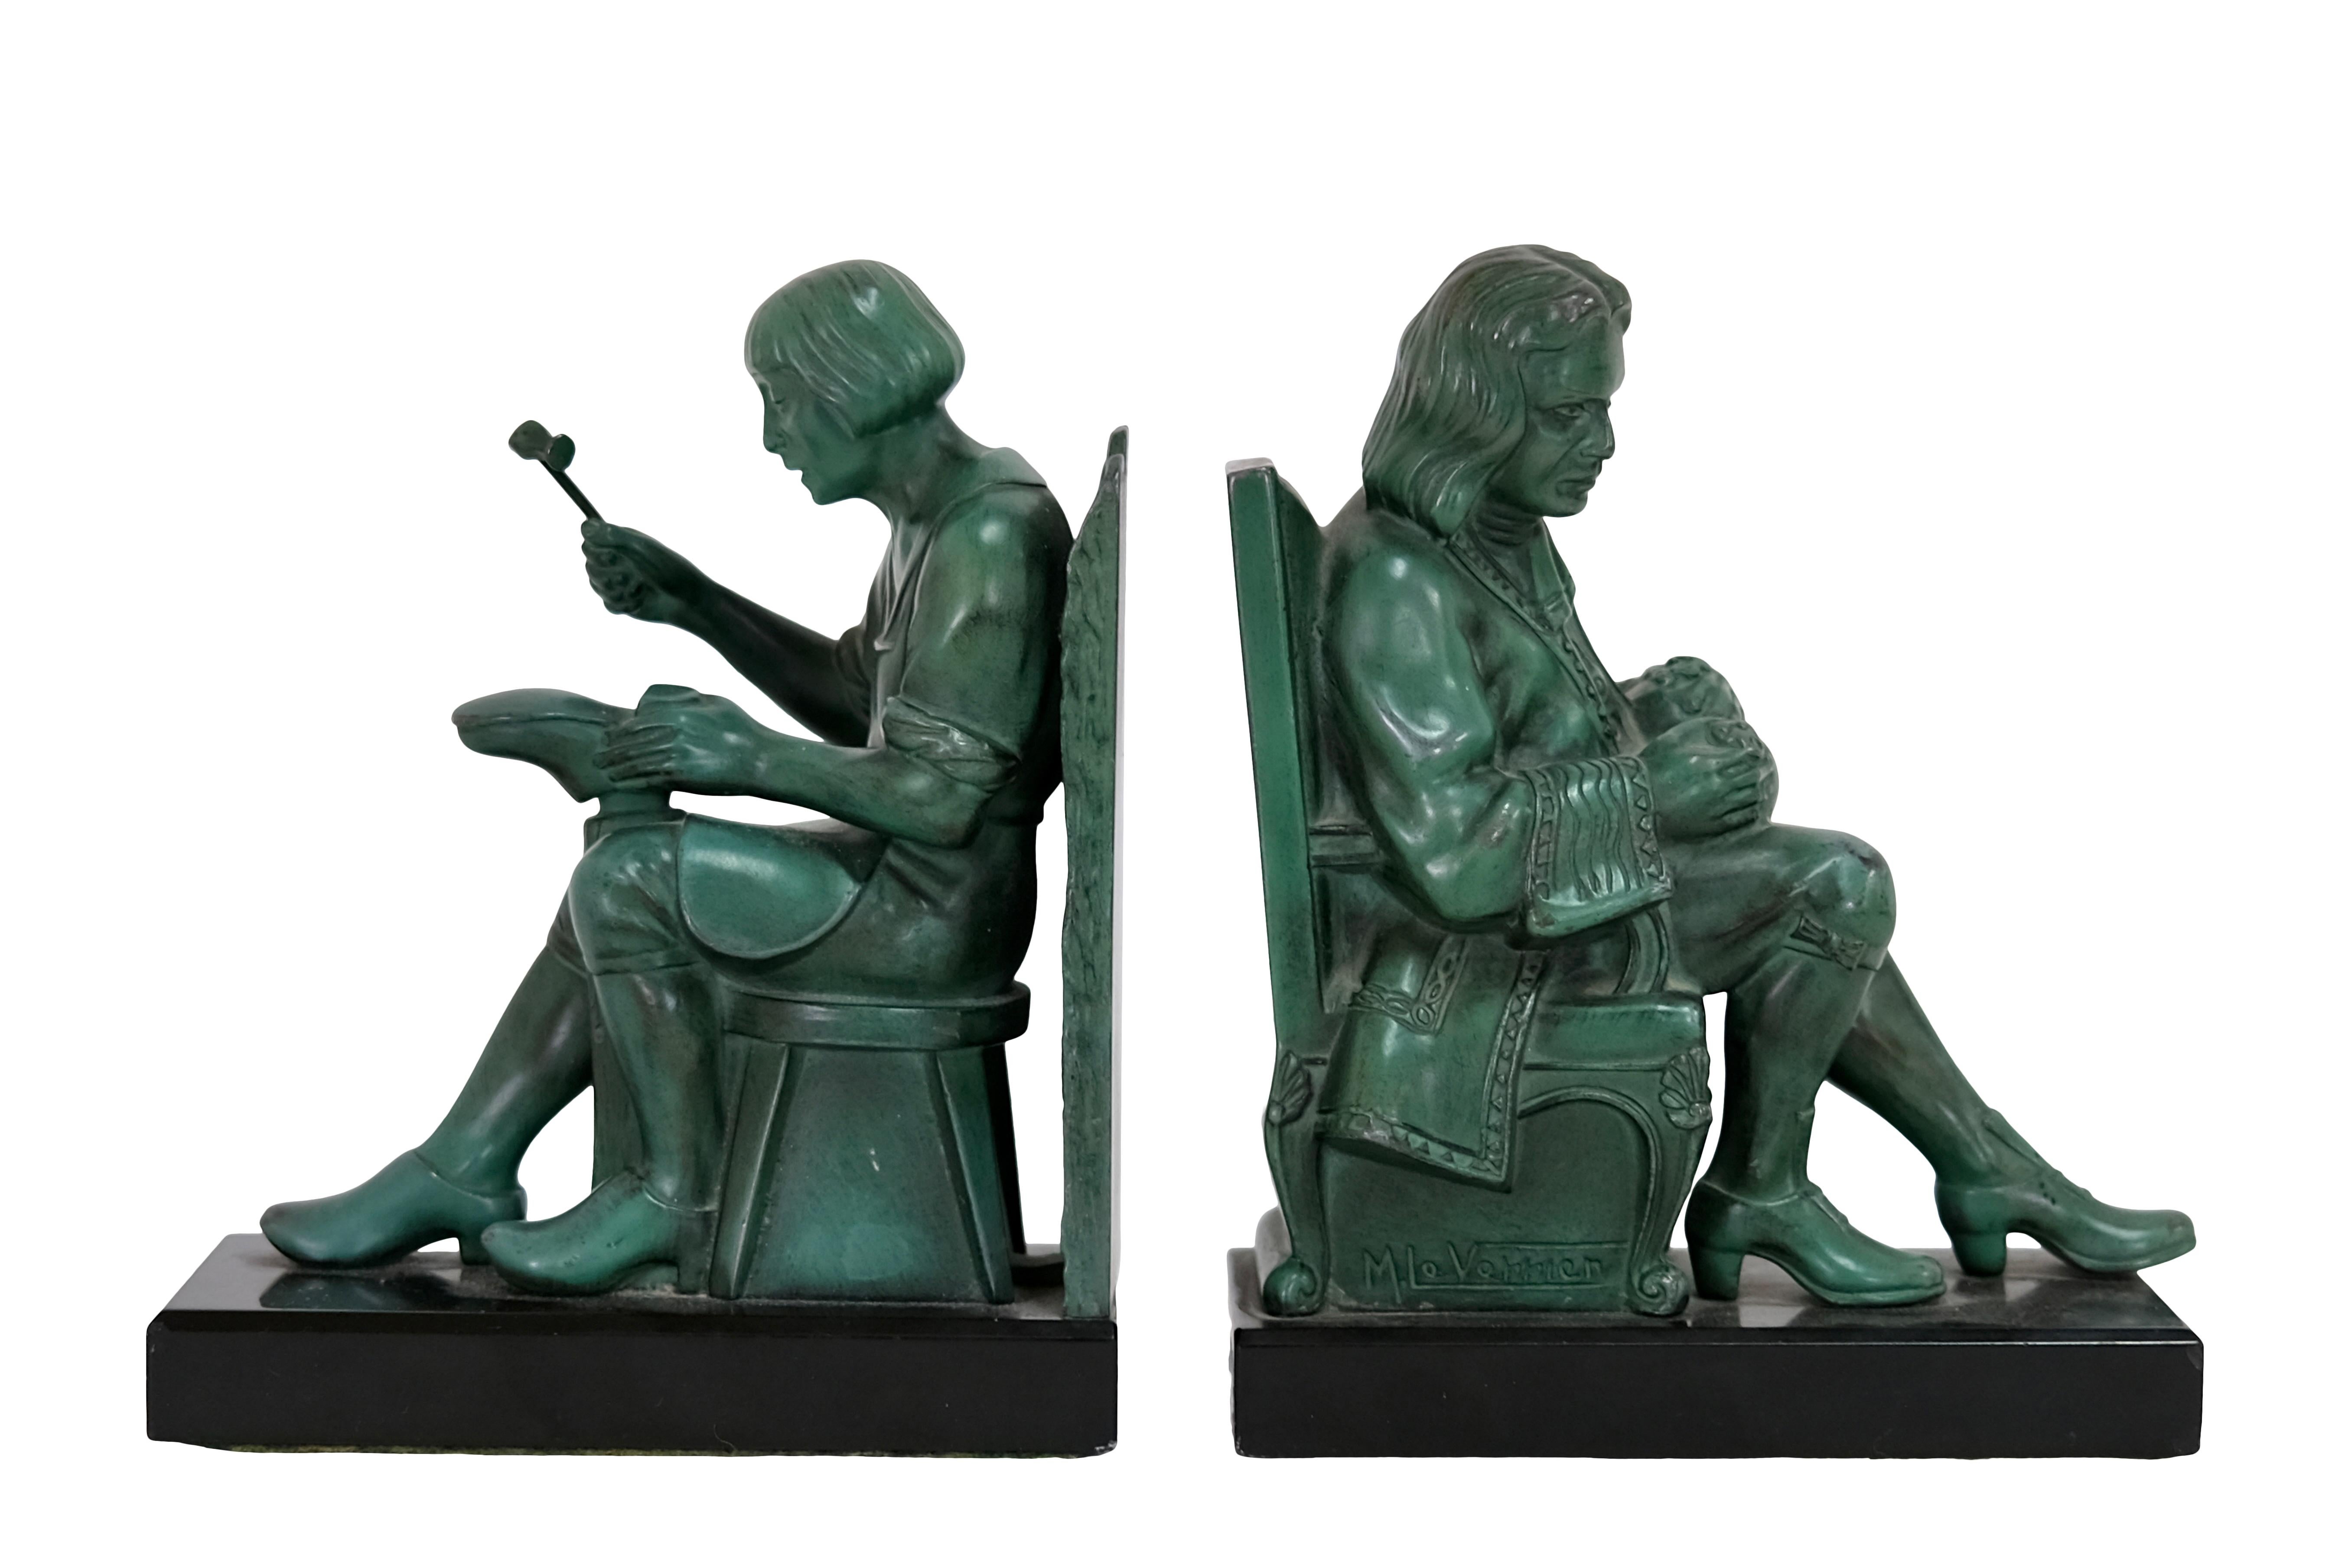 The Cobbler working on Boots and the Nobleman protecting his Money. 
Bookends by “Max Le Verrier”, signed
Original French Art Deco, 1930s

Bookends made in “Régule” (spelter) 
Socle in Marble 
Original green patina 

Dimensions each